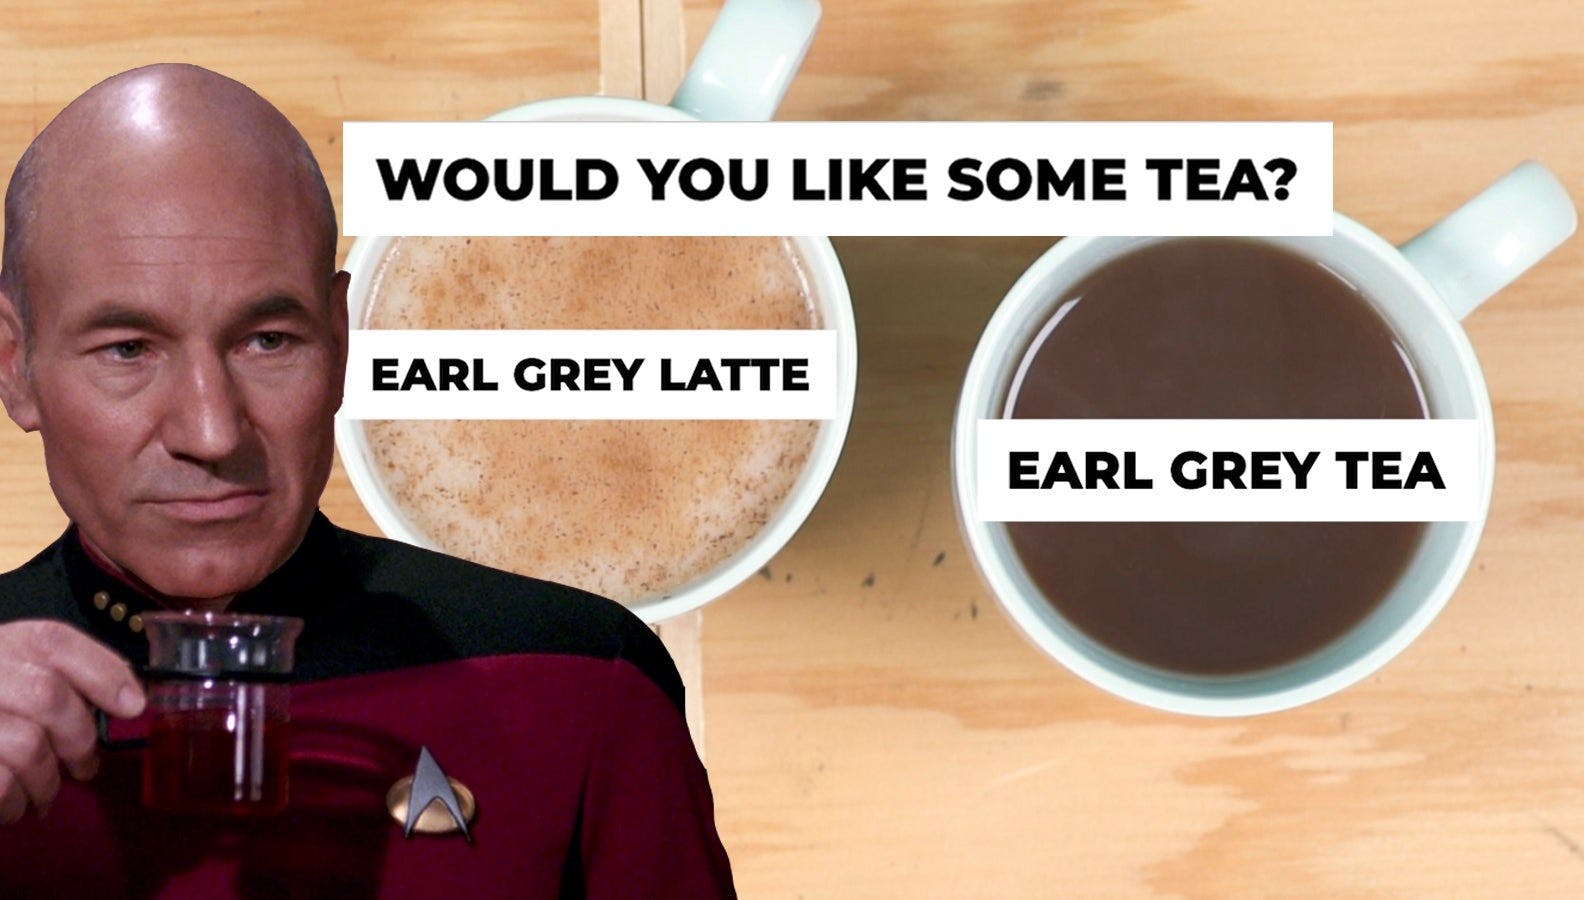 Picard's perfect cup of tea